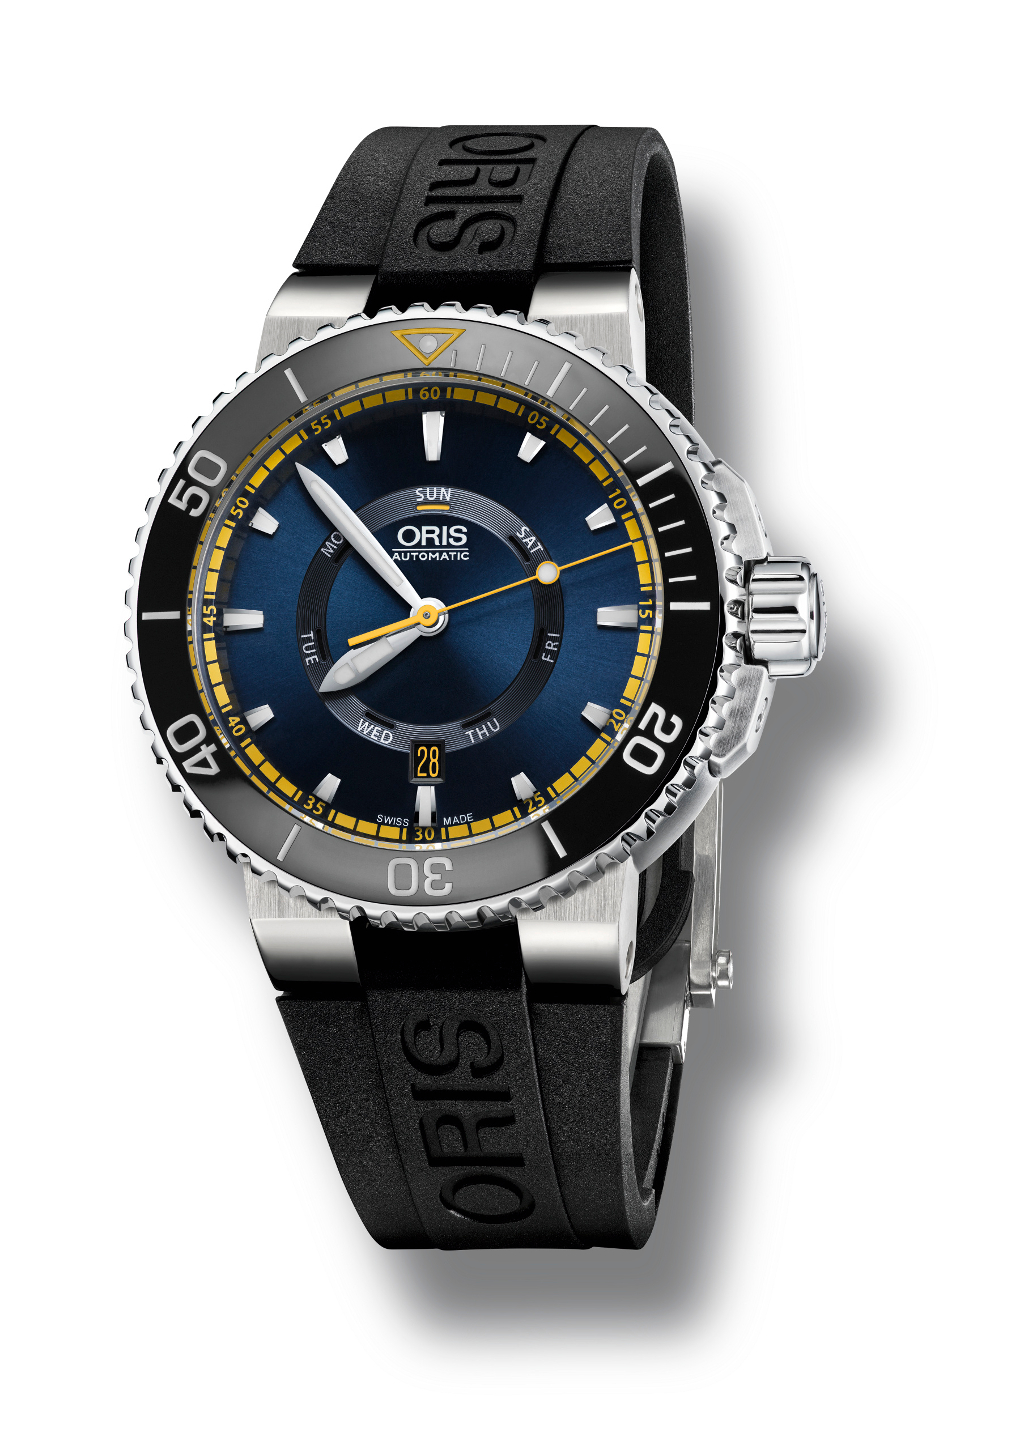 The Oris Great Barrier Reef Limited Edition II.